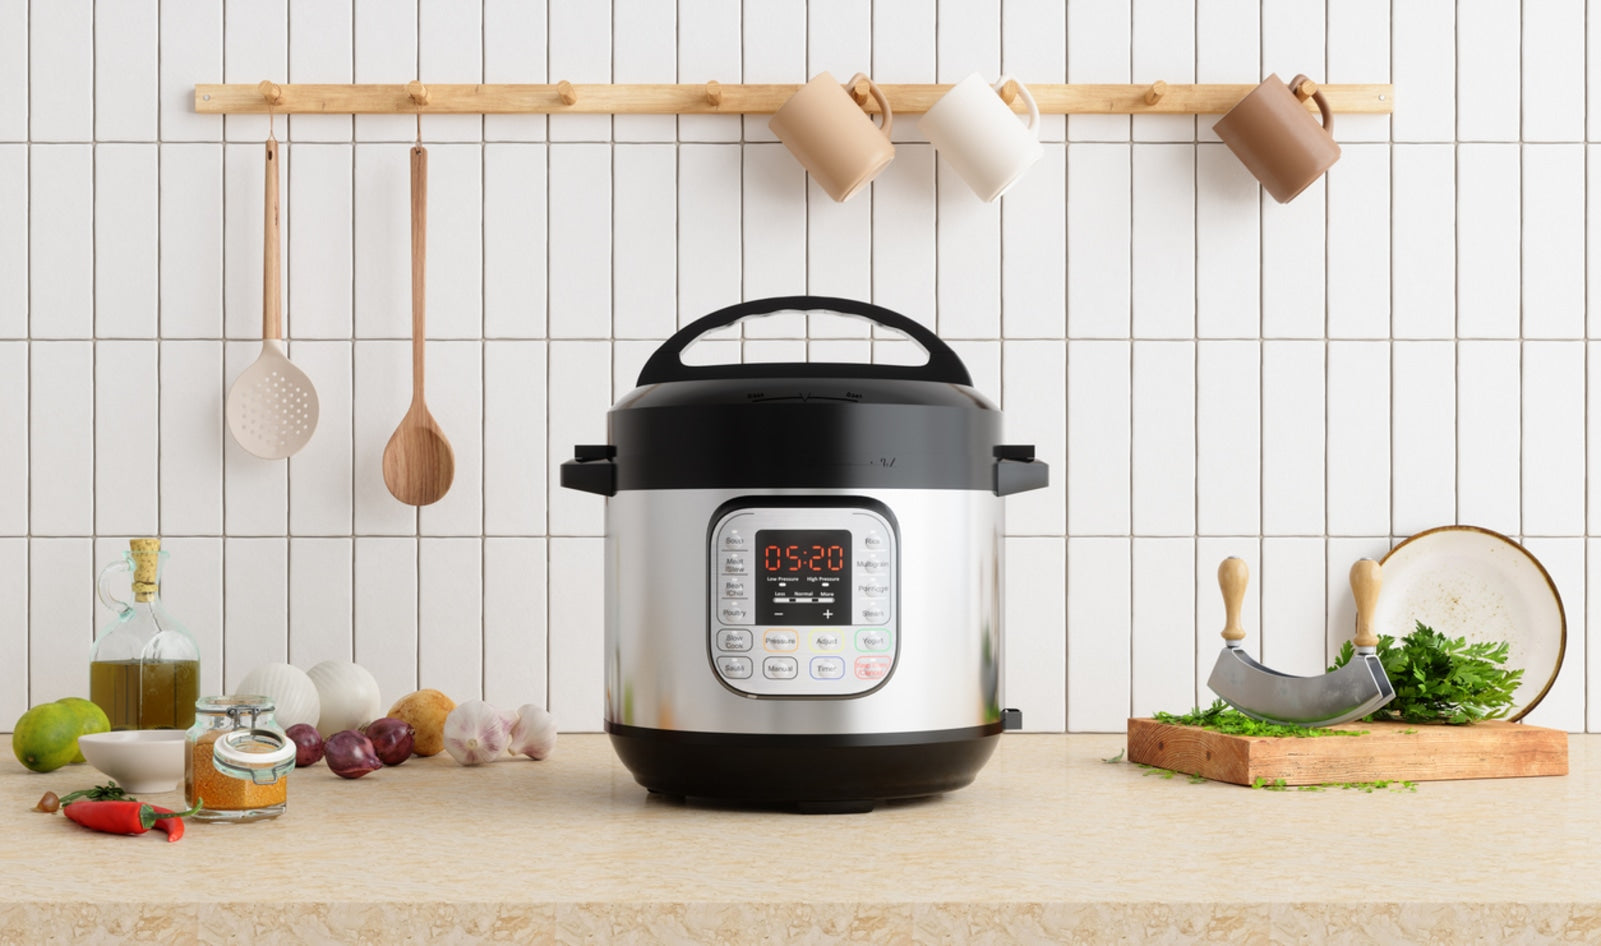 Best Electric Hot Pot Models for Family Dinners